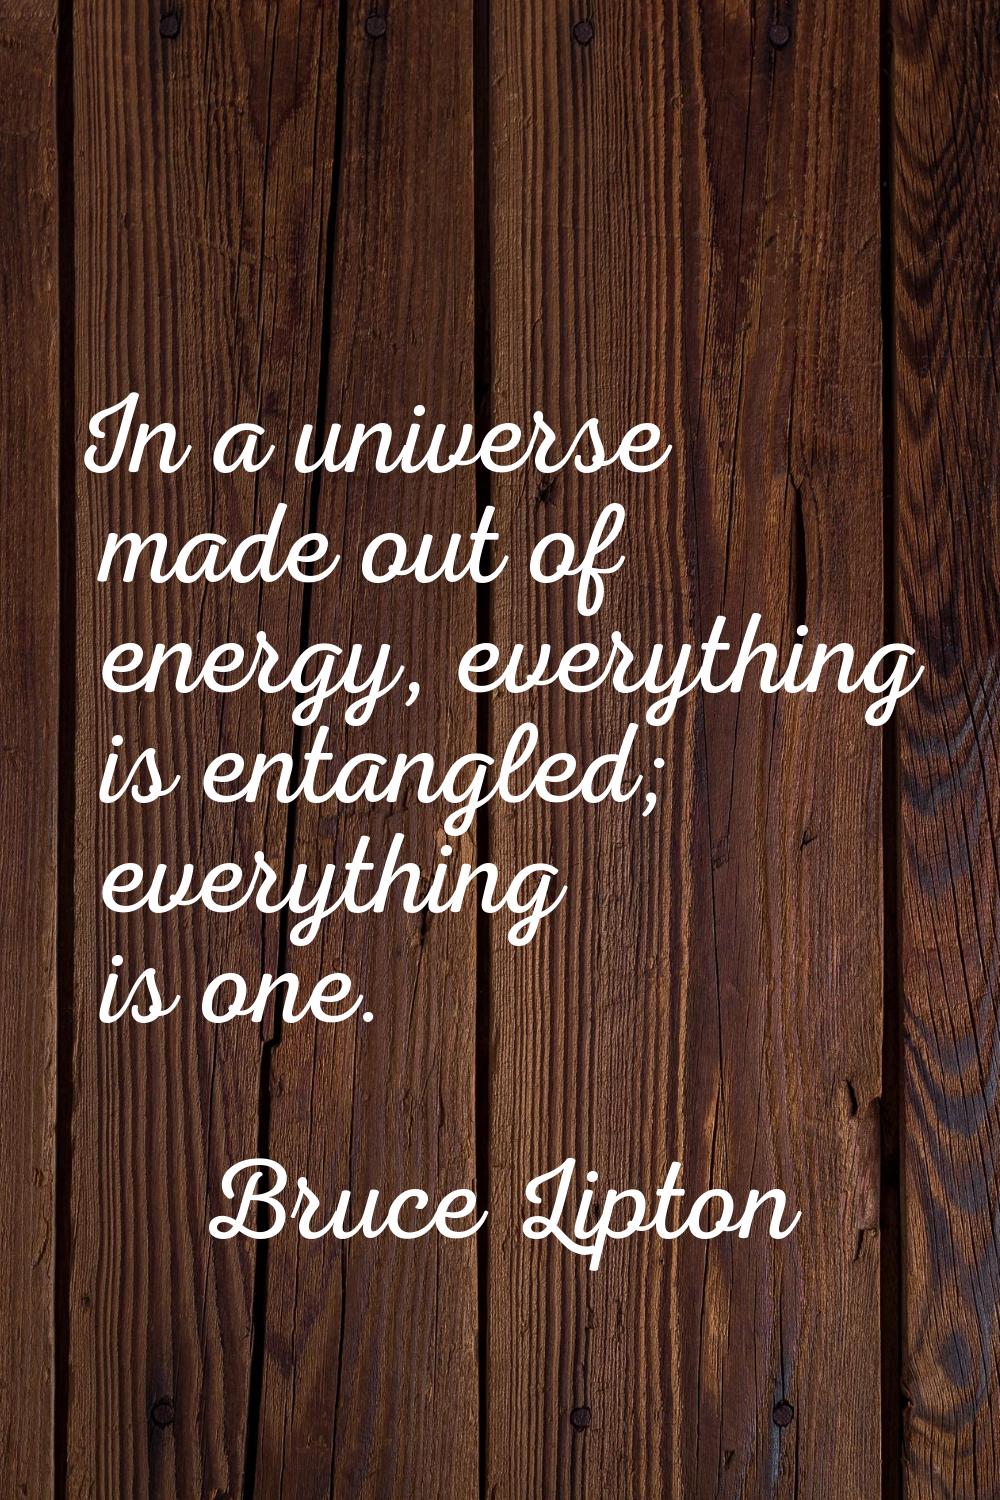 In a universe made out of energy, everything is entangled; everything is one.